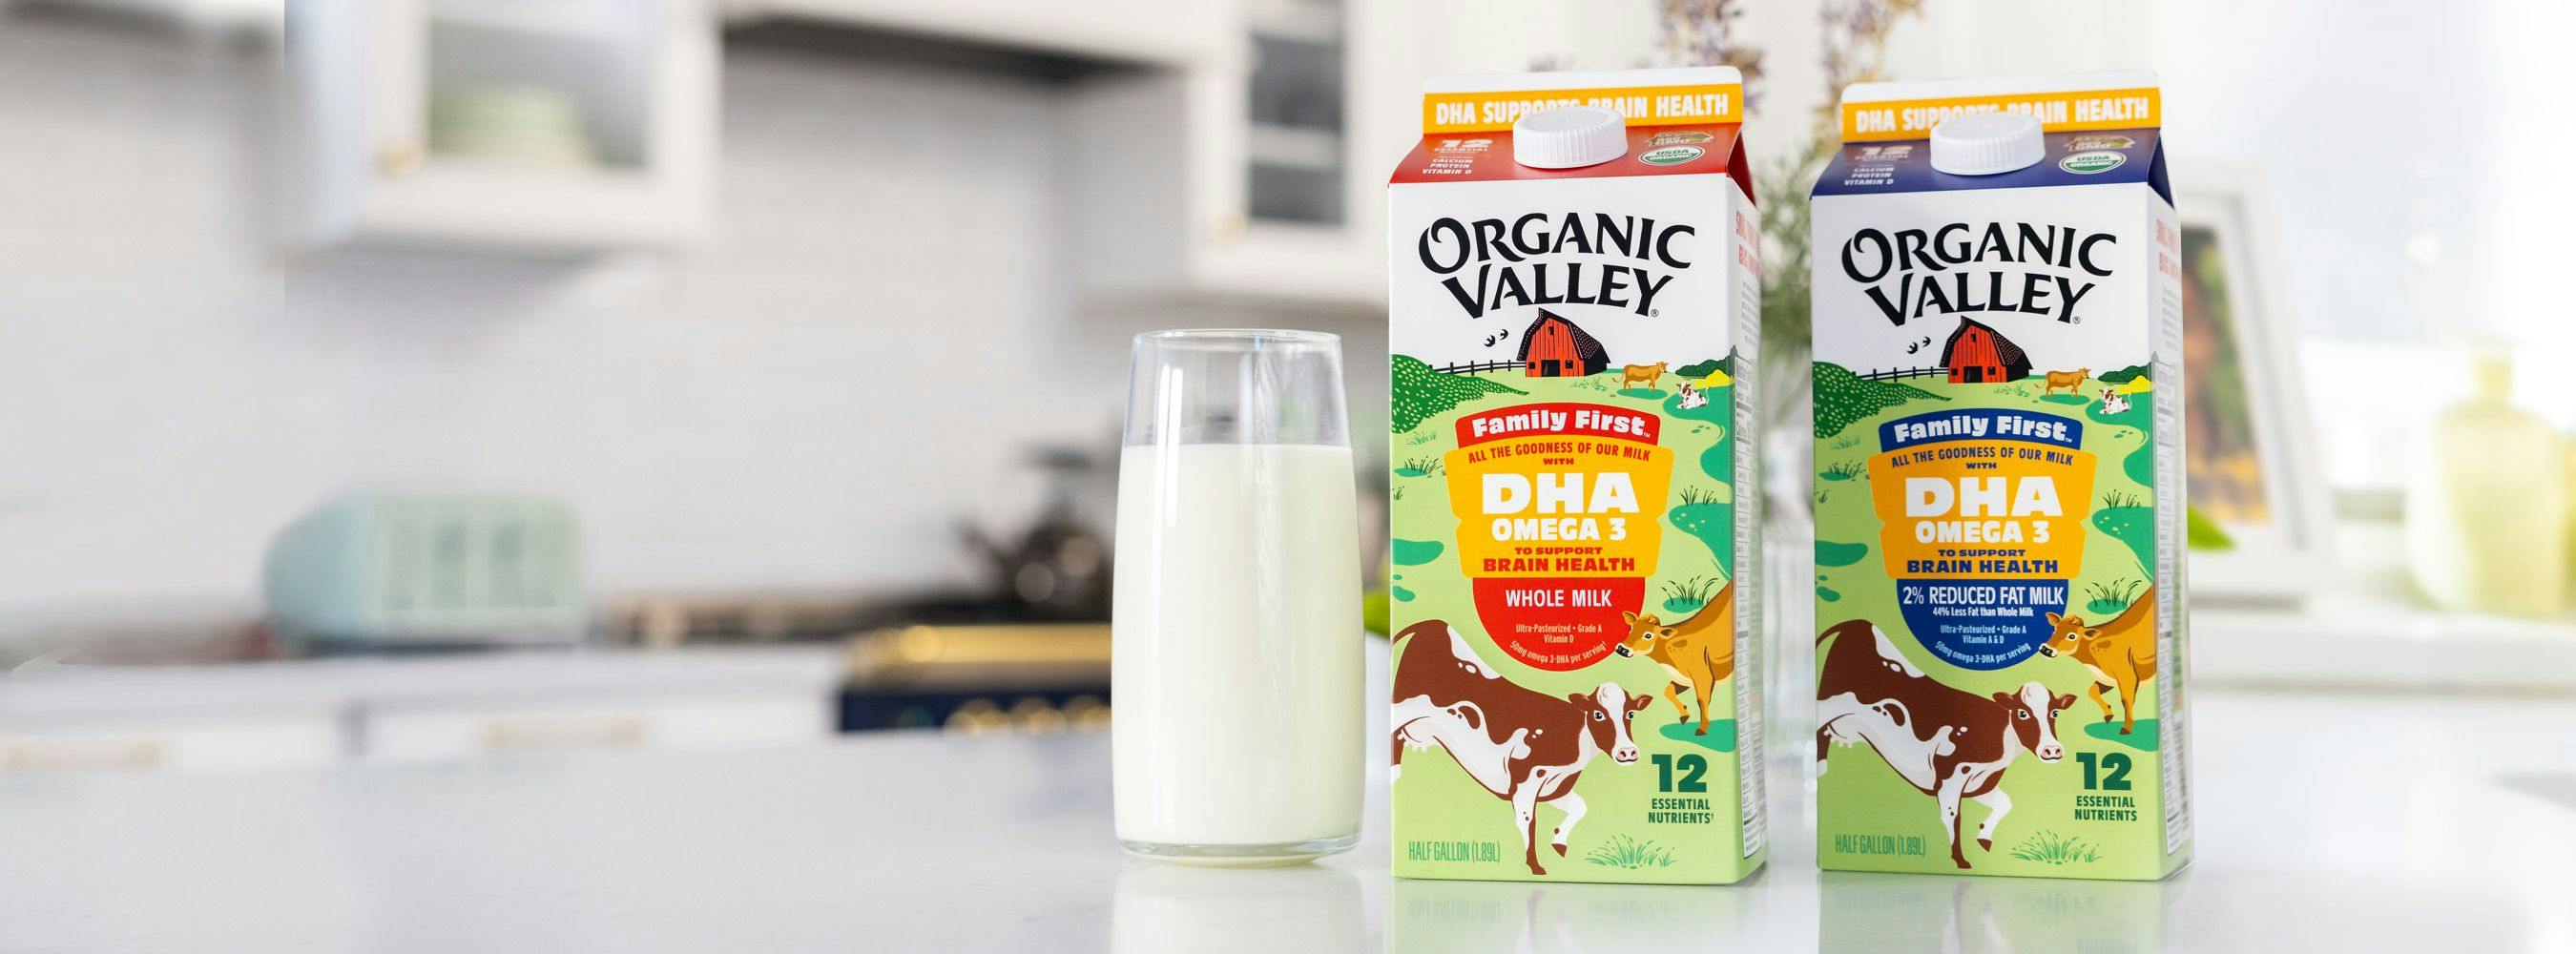 DHA omega 3 milk organic valley whole and 2%